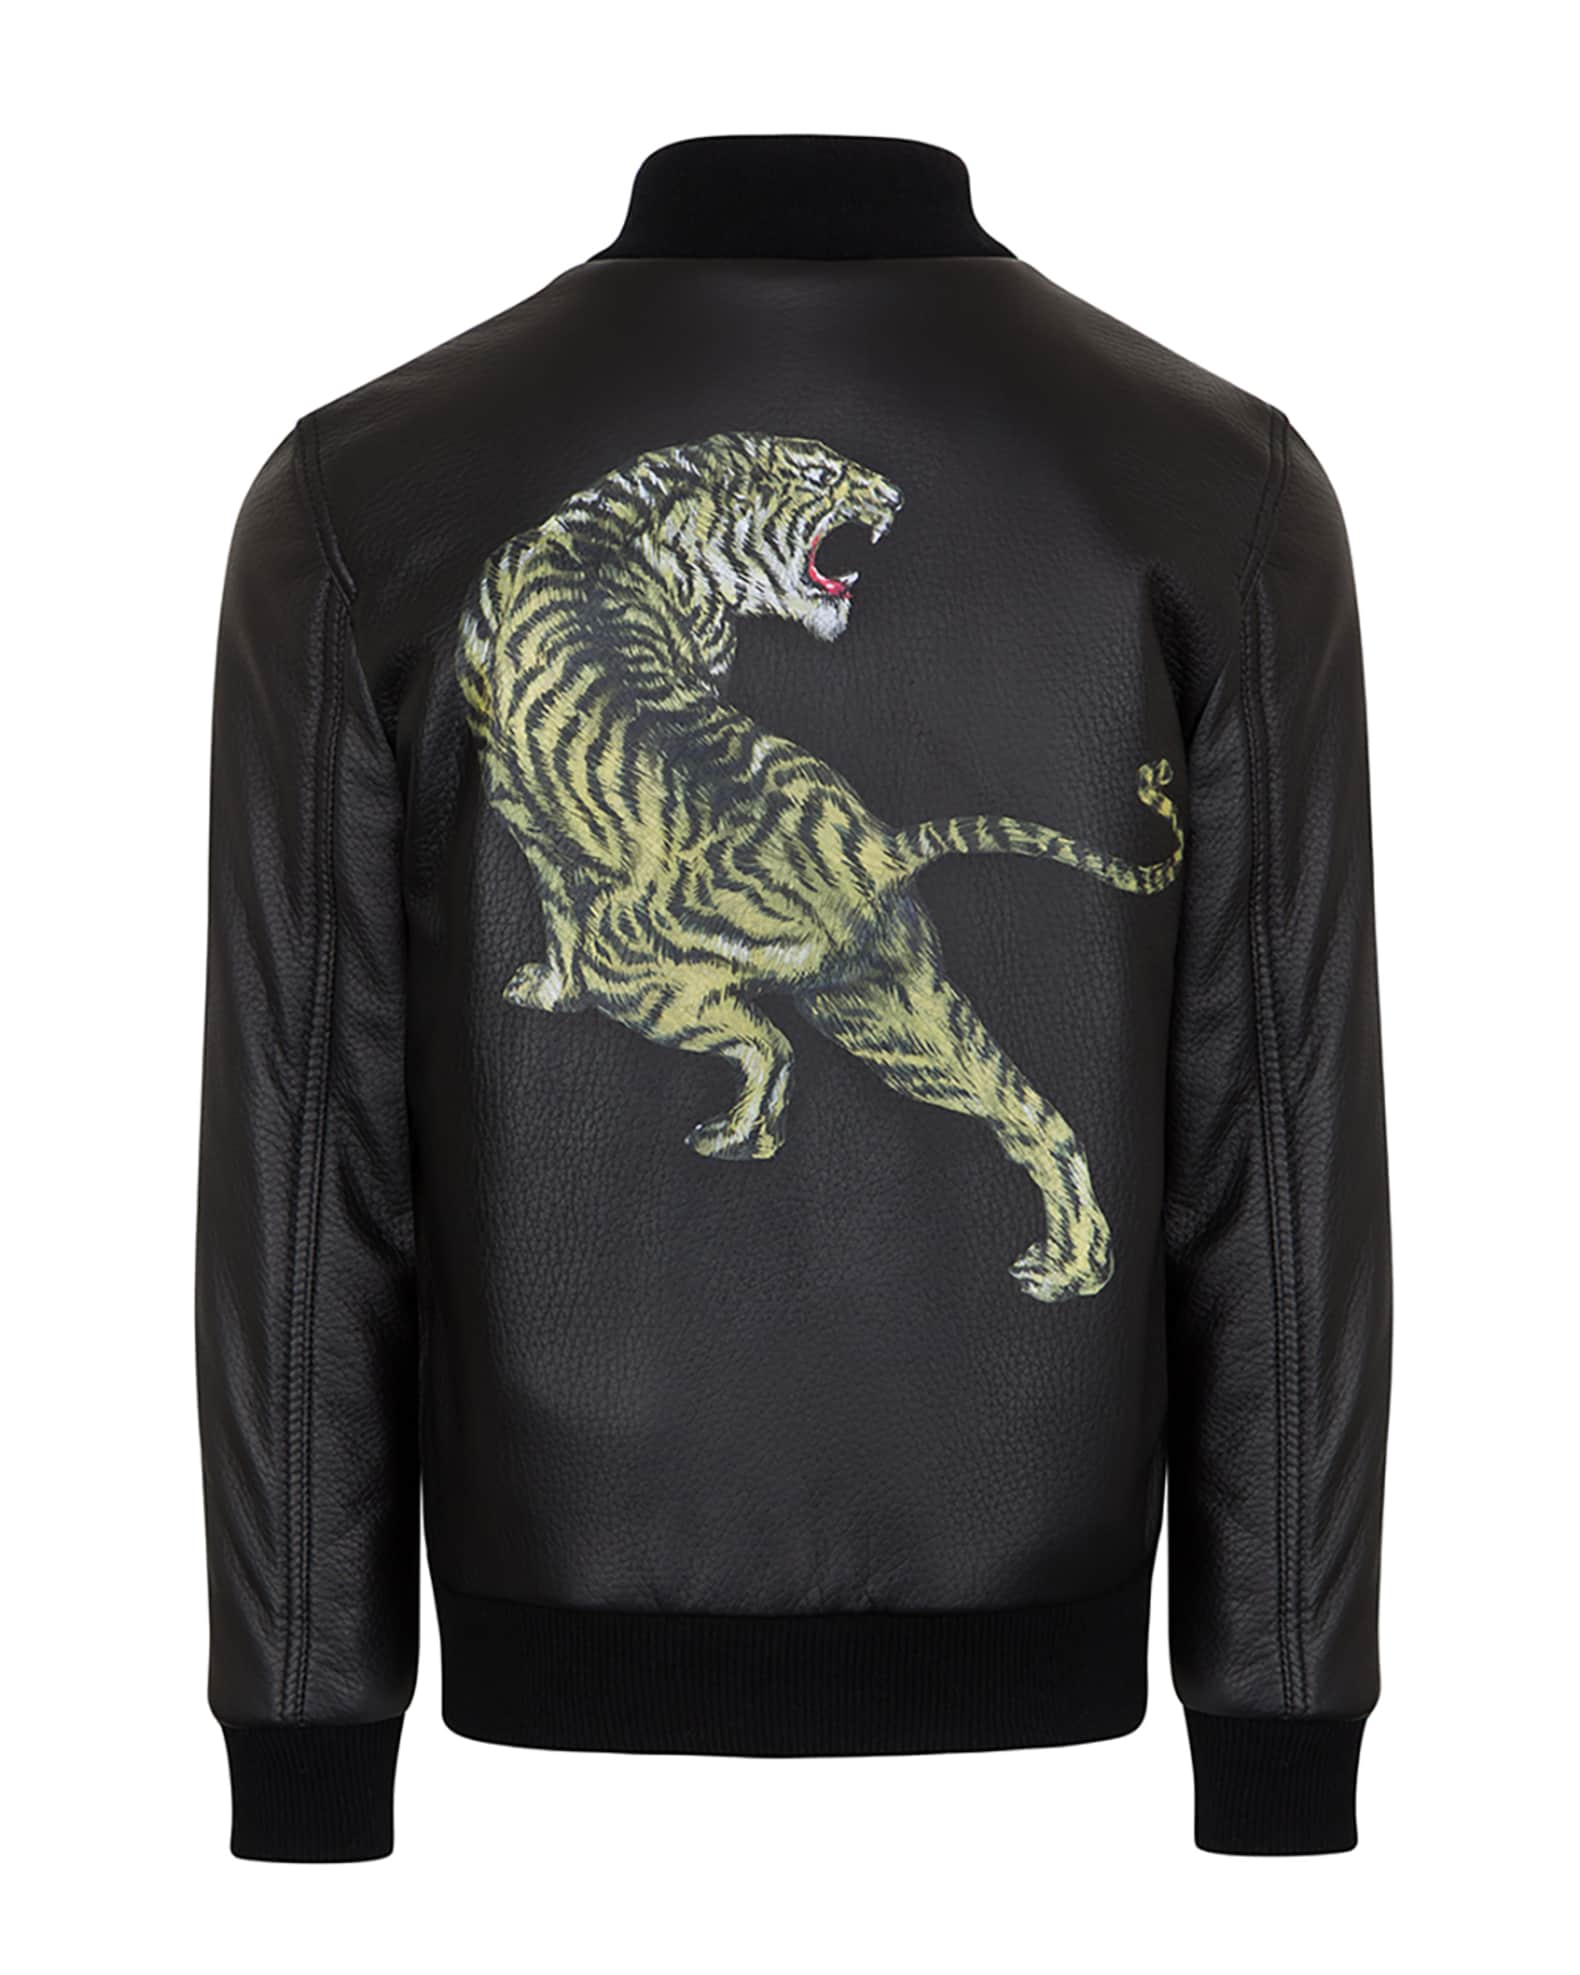 Stefano Ricci Boy's Tiger Embroidered Leather Bomber Jacket